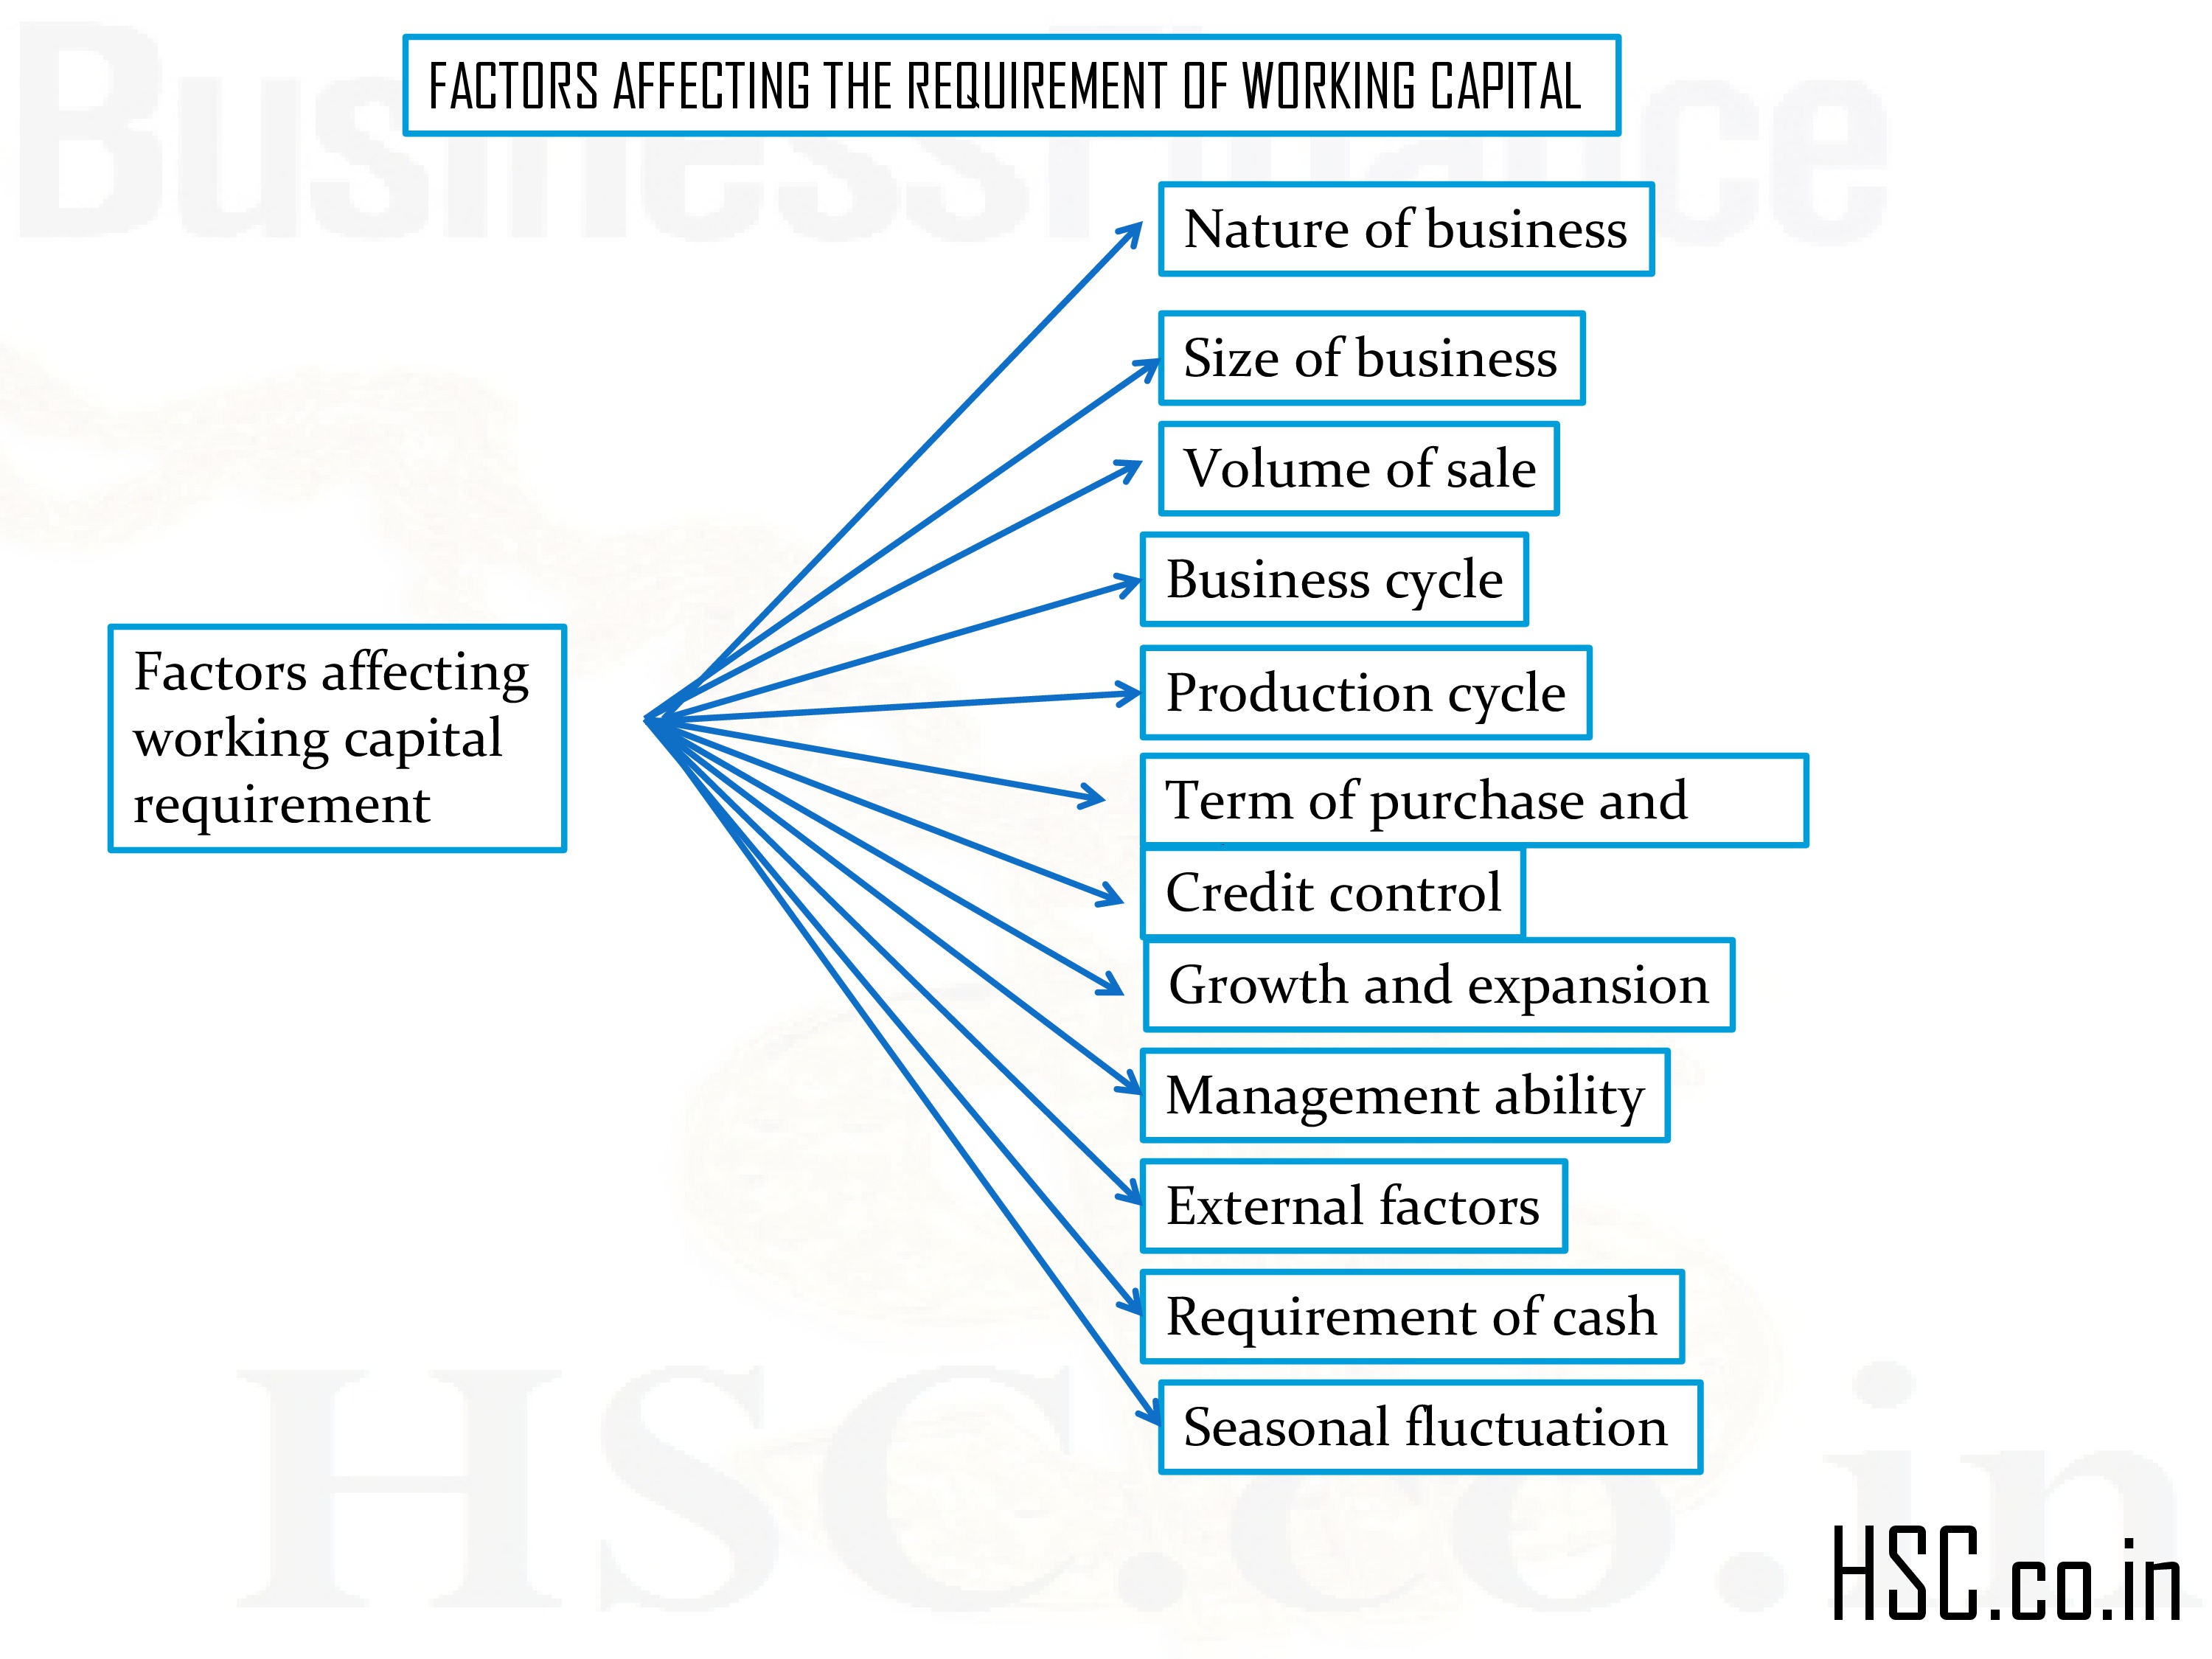 FACTORS AFFECTING THE REQUIREMENT OF WORKING CAPITAL